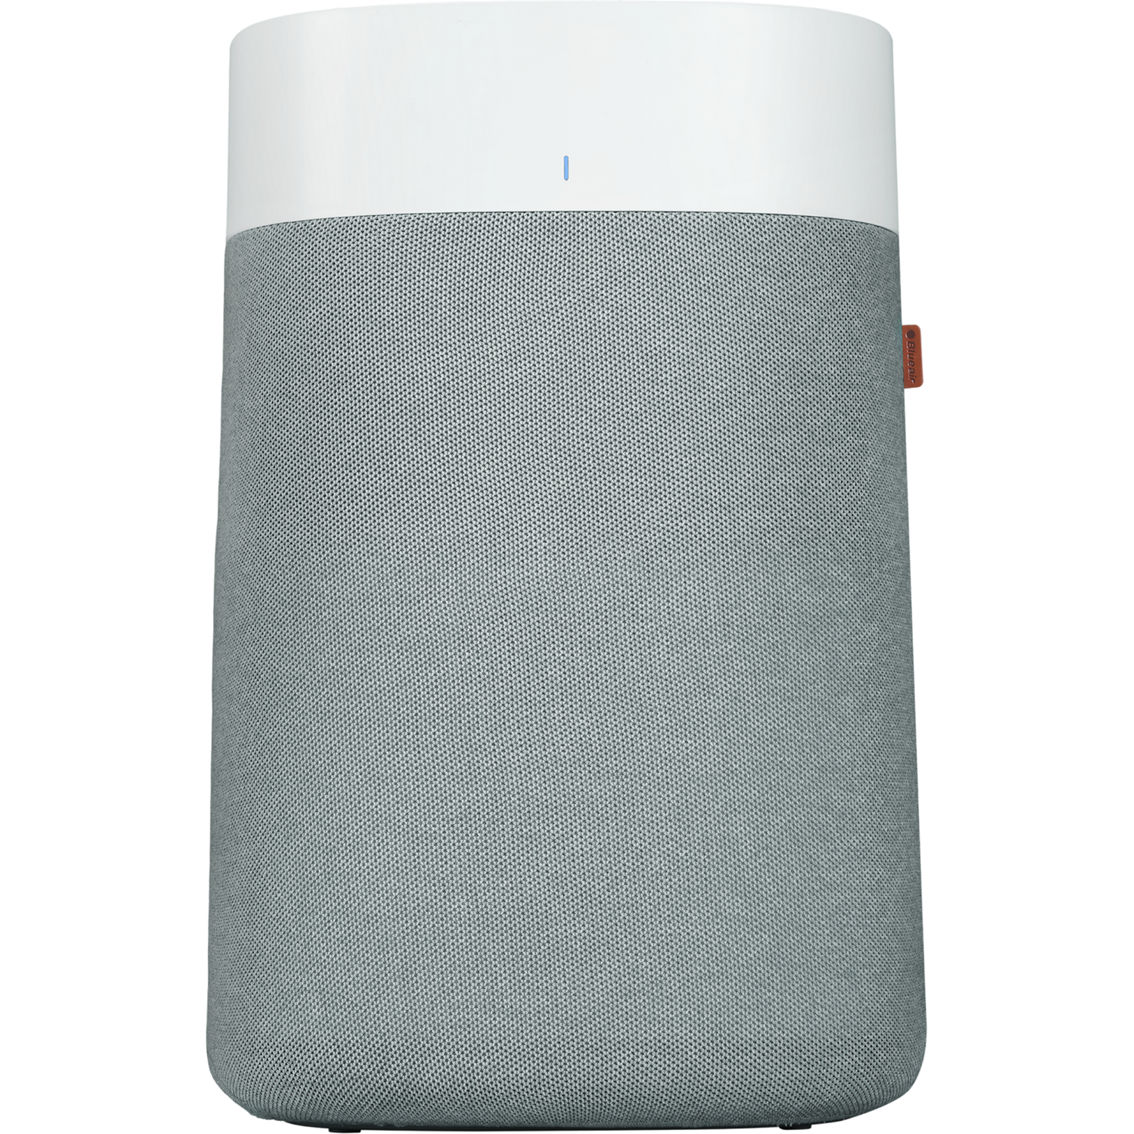 Blueair 211i Max Air Purifier with Bluetooth - Image 3 of 7